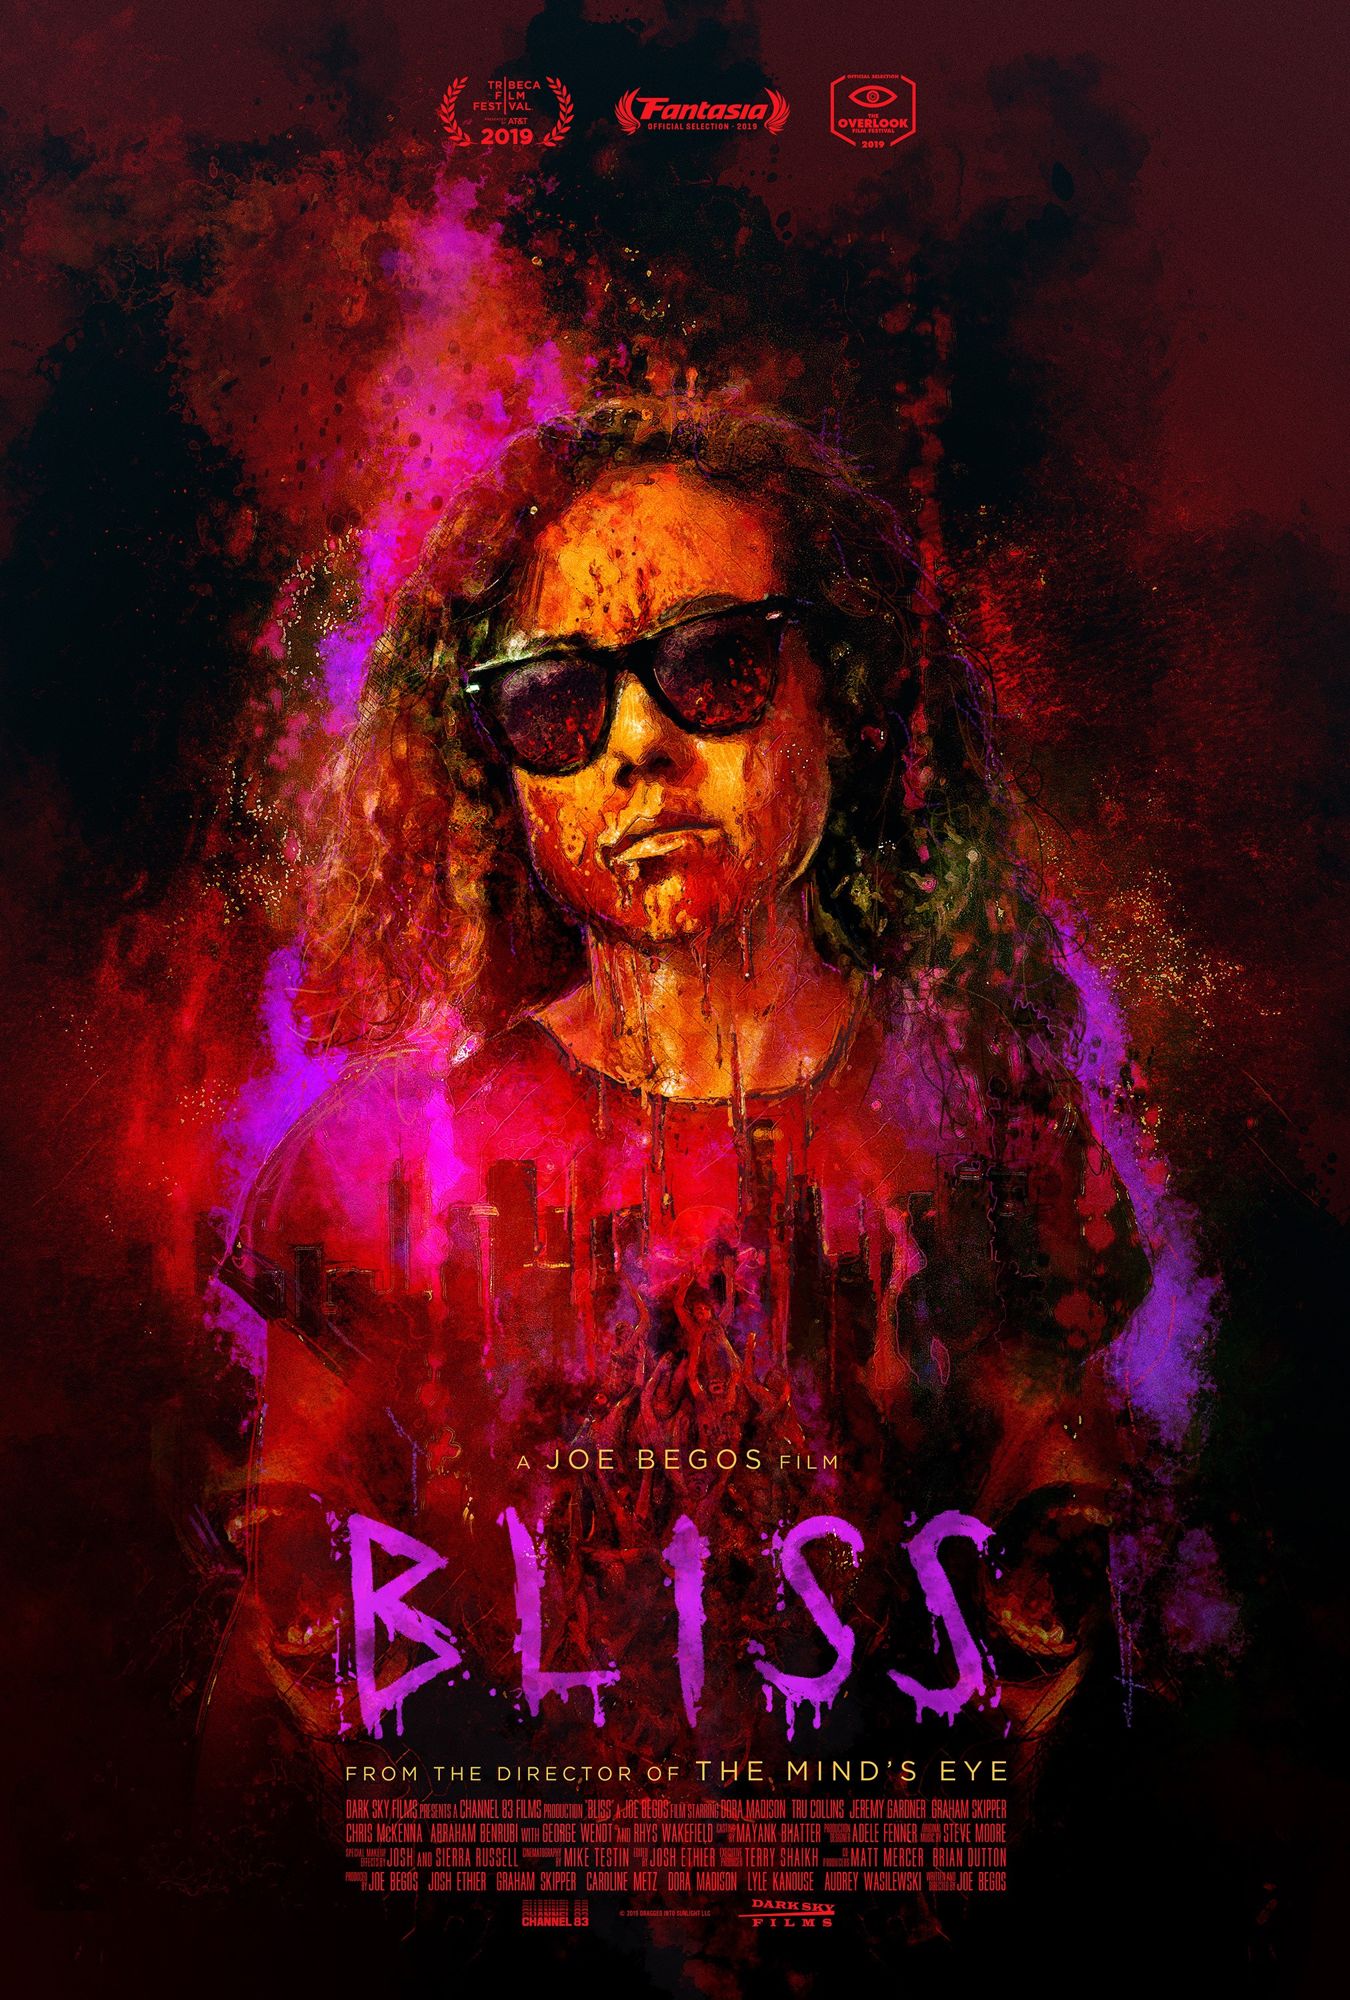 bliss movie reviews 2021